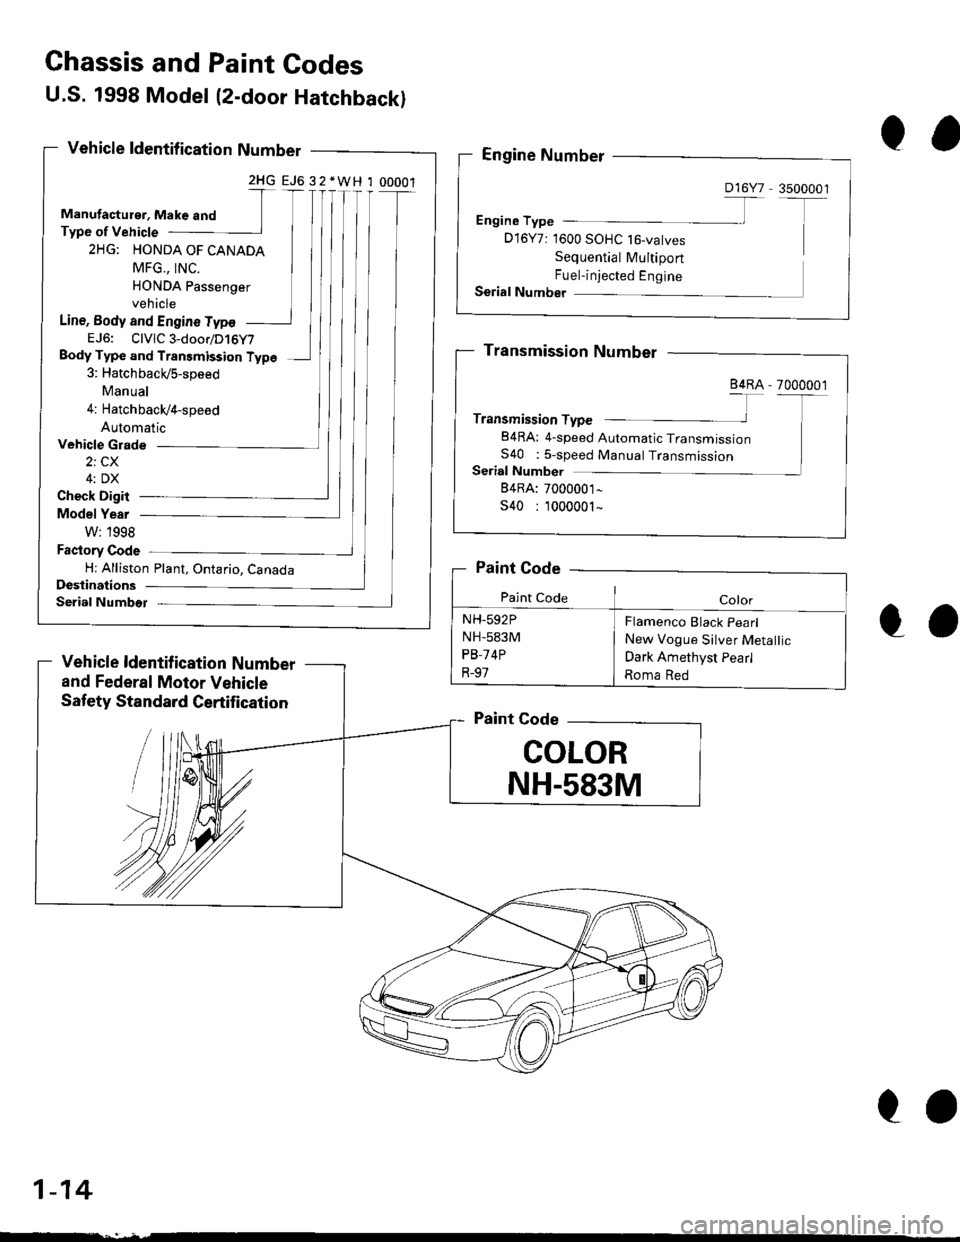 HONDA CIVIC 1996 6.G User Guide Ghassis and Paint Godes
Vehicle Grade
2i CX
4: DX
Check Digit
Model Year
W: 1998
Factory Code
Hr Alliston Plant, Ontario, CanadaDeslinations
Serial Numbet
Vehicle ldentif ication Number
and Federal Mo